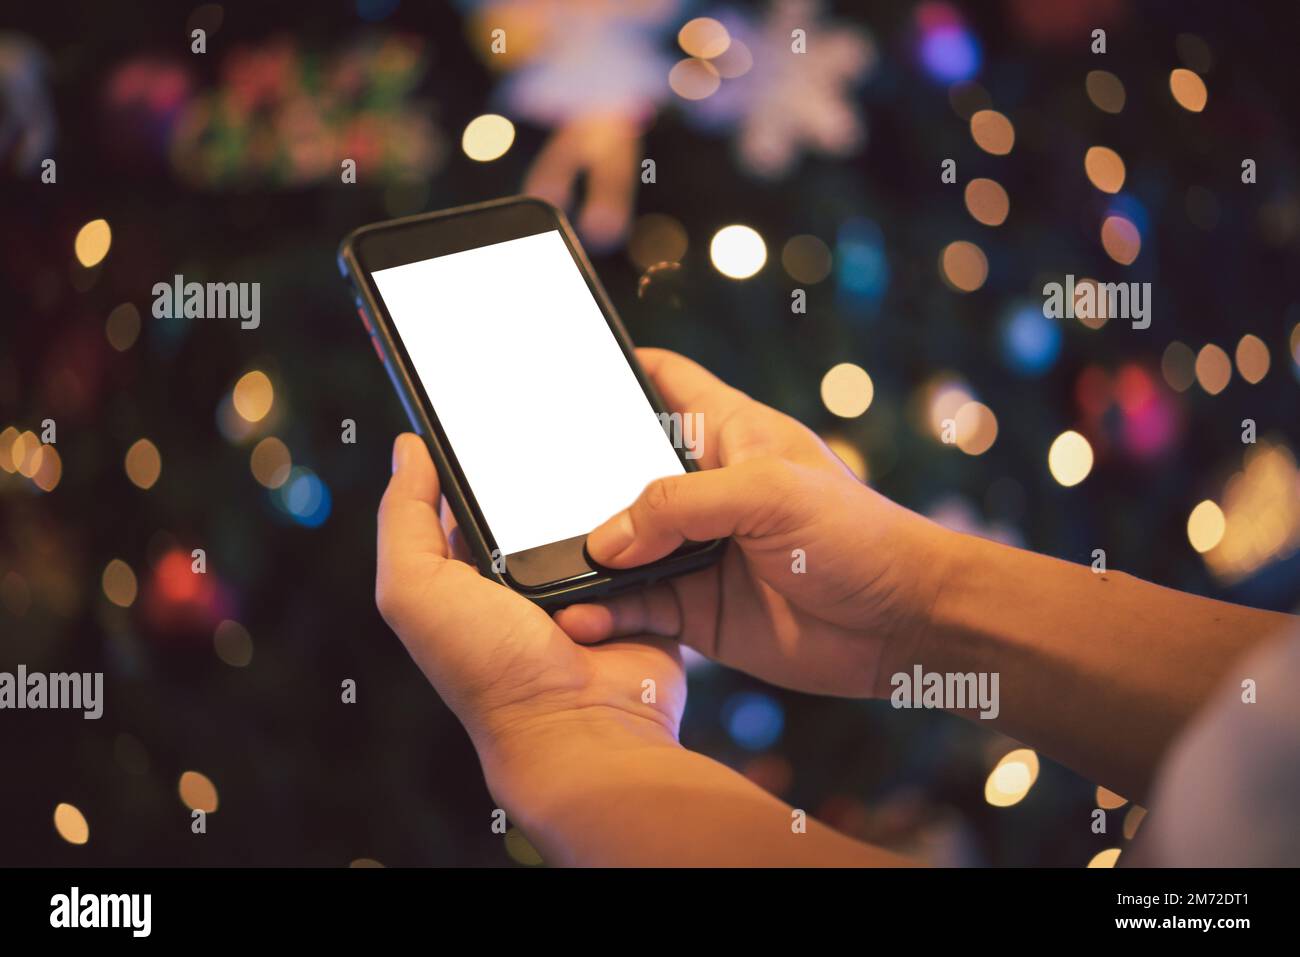 male hands using smartphone at night on city with background bokeh.Phone blank mock up white screen. Stock Photo